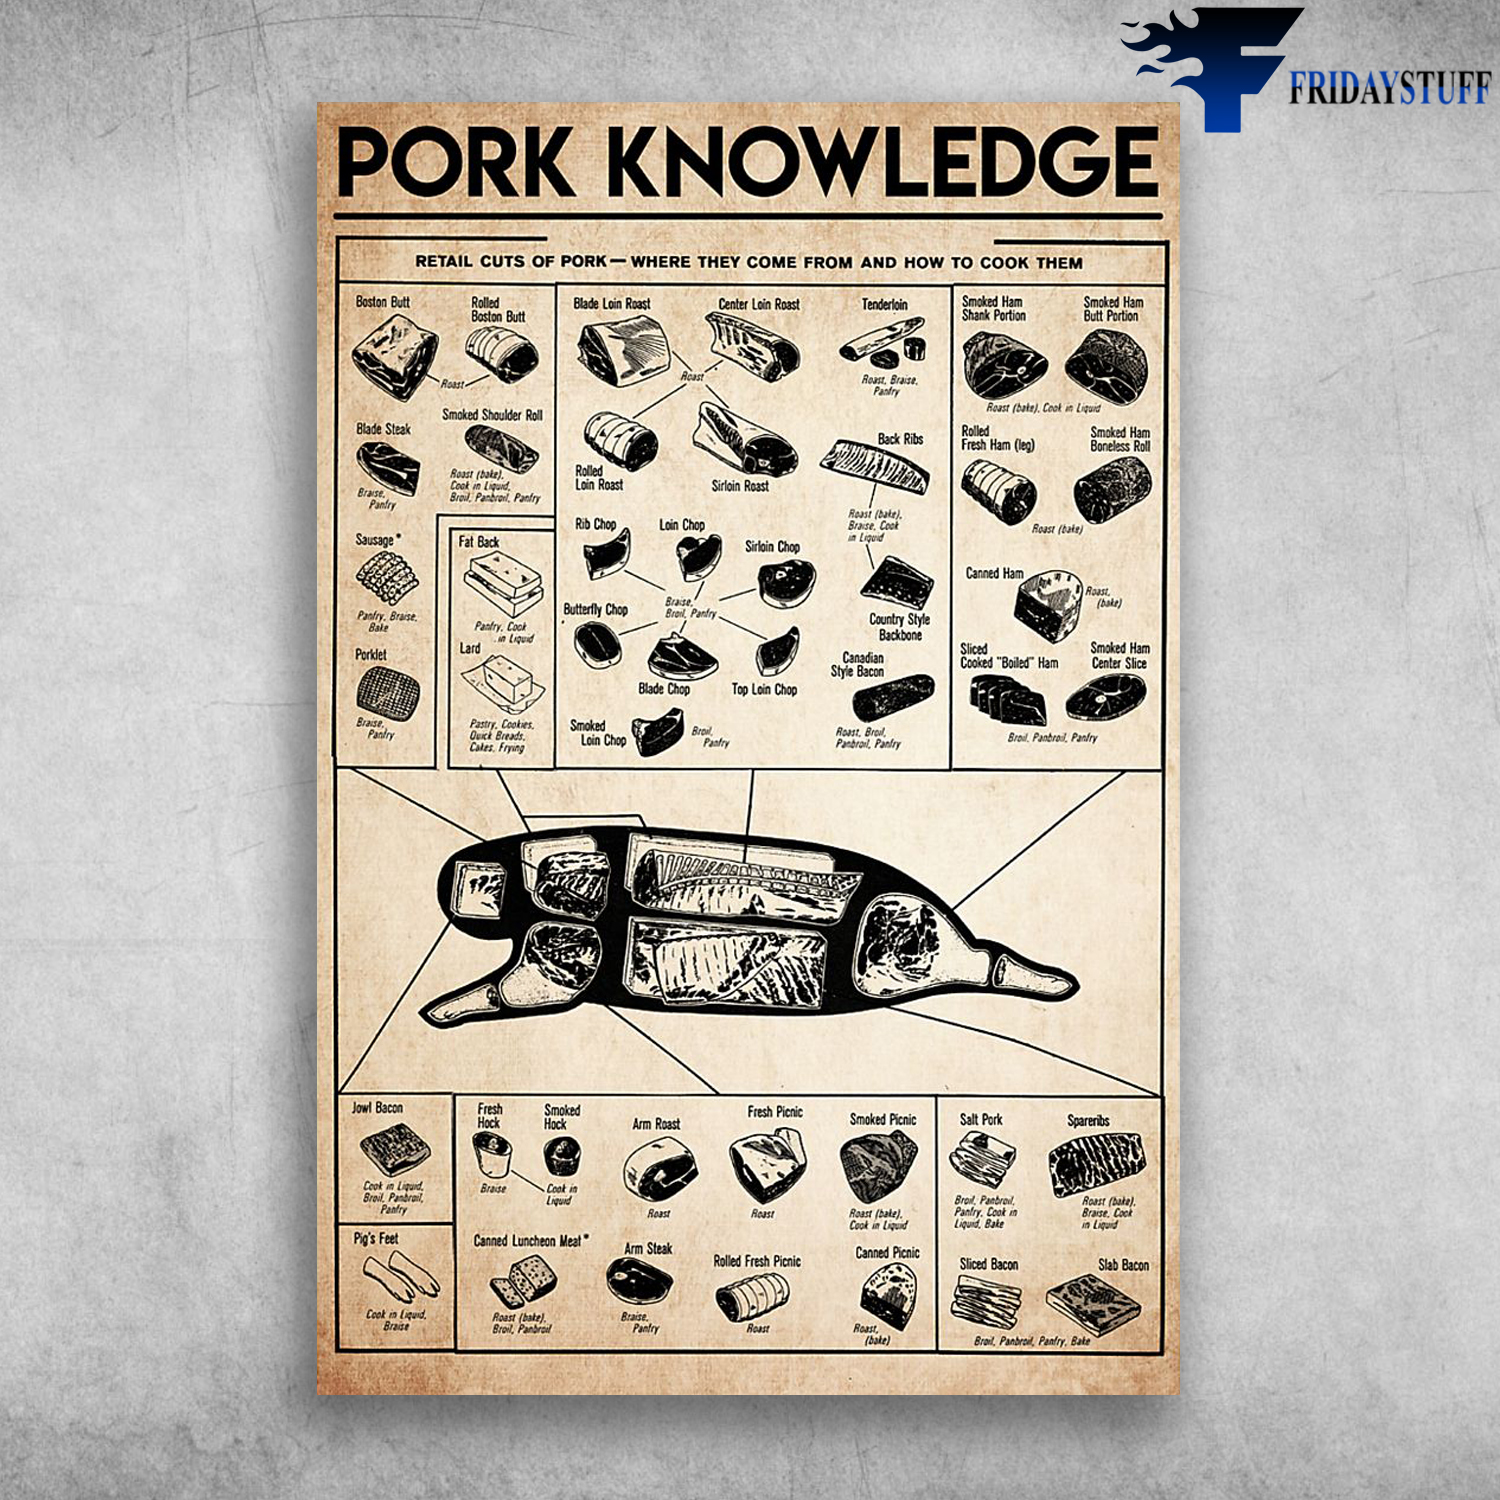 Pork Knowledge Retail Cuts Of Pork Where They Come From And How To Cook Them